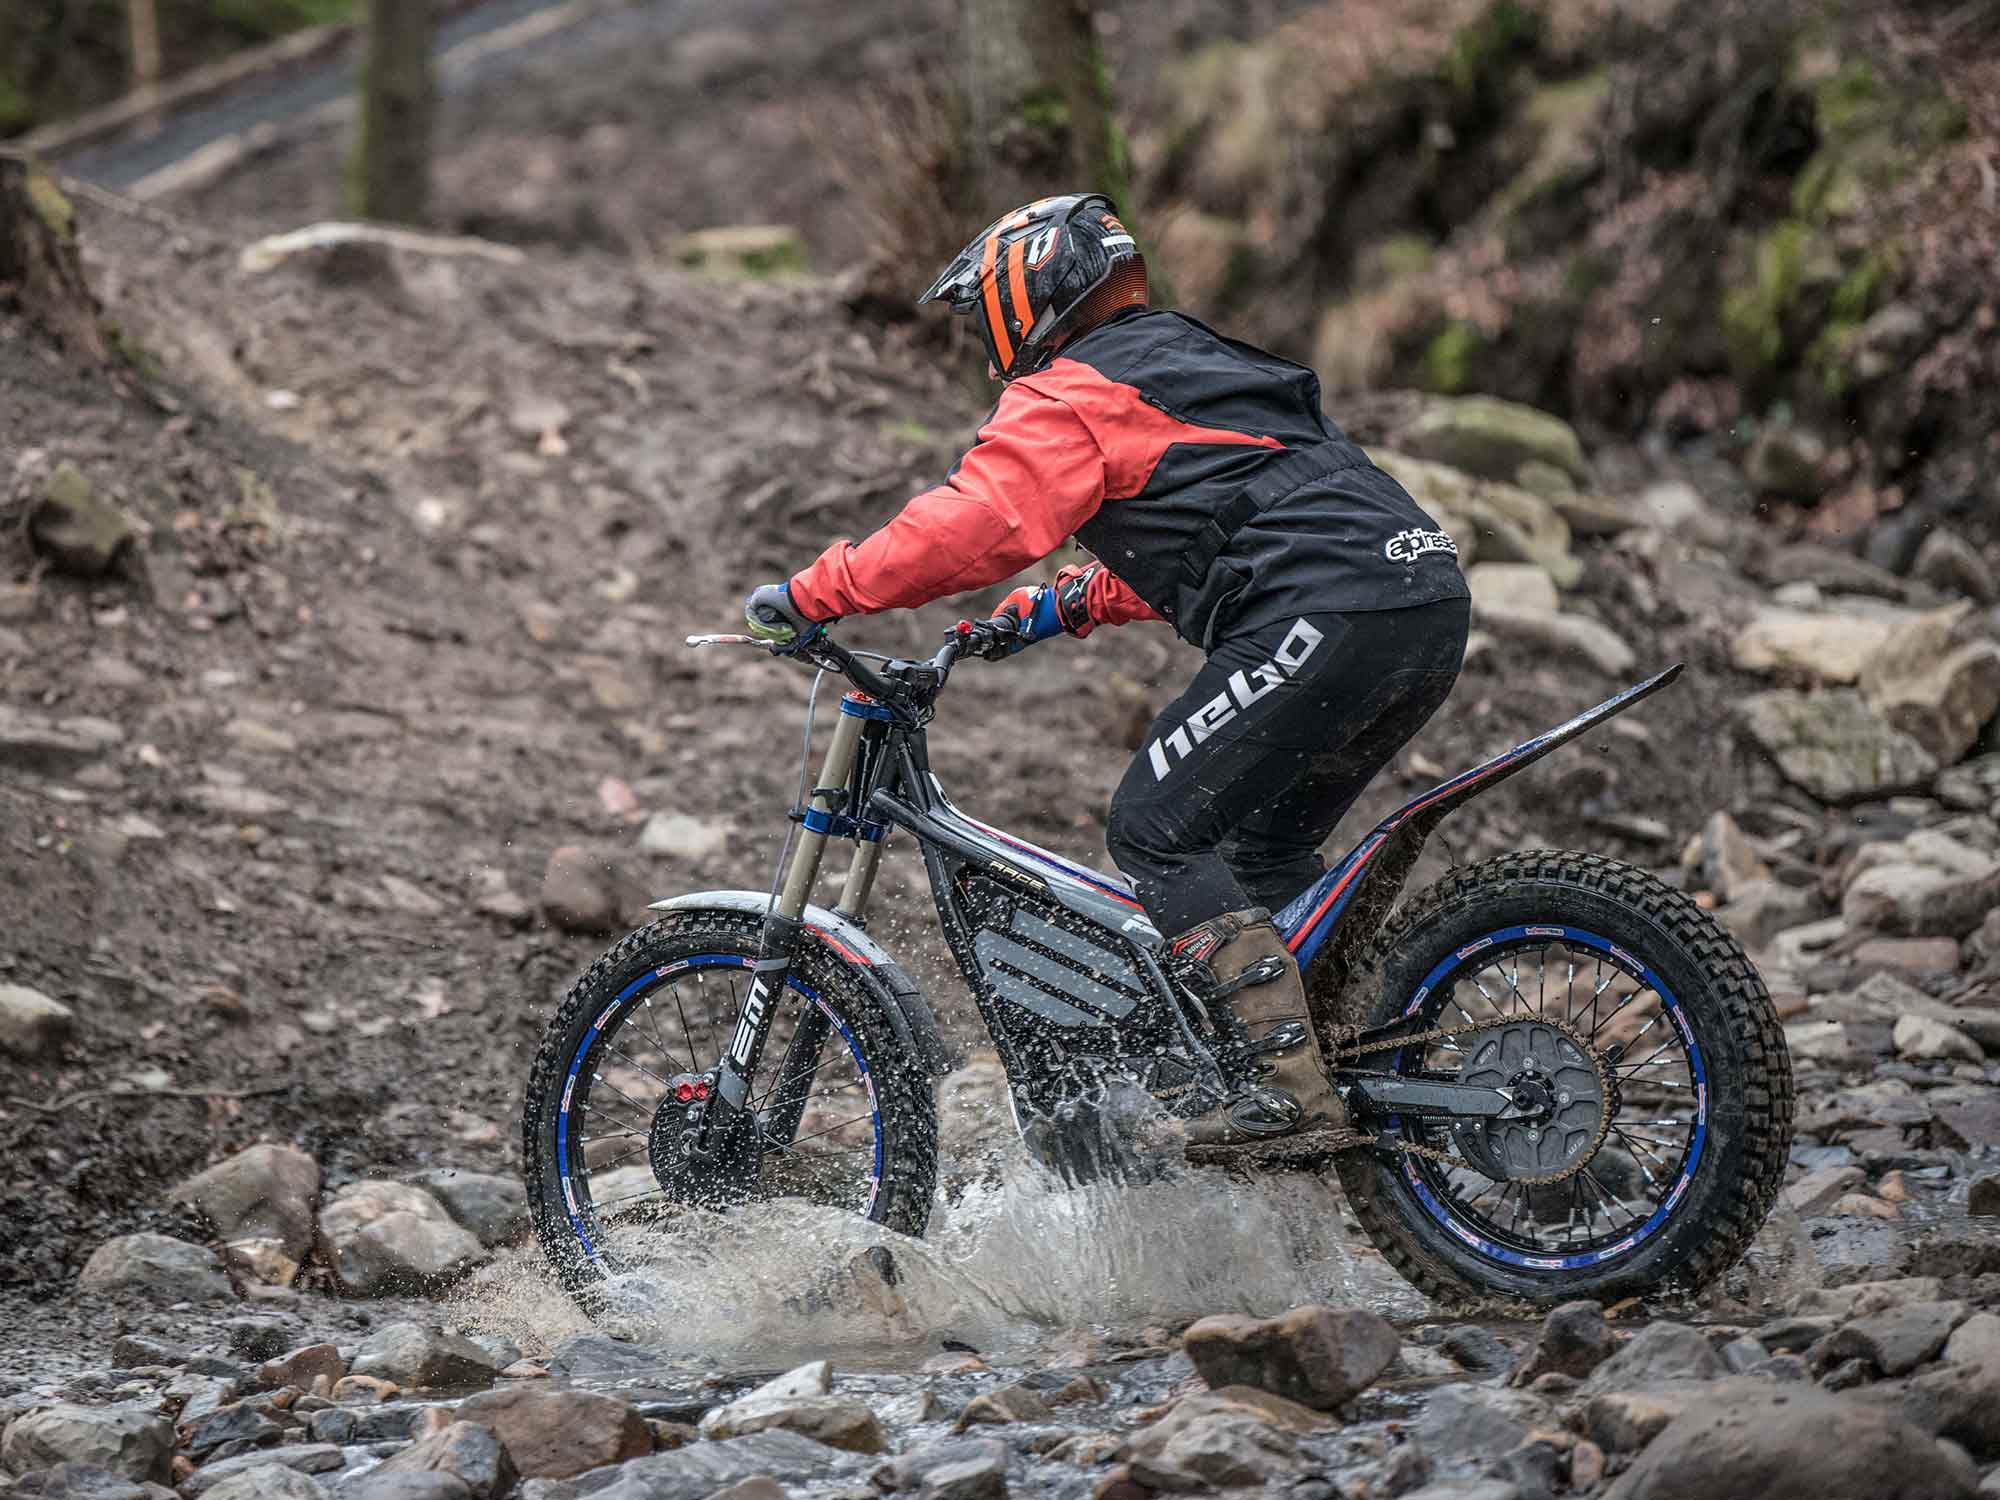 Conventional trials bikes have a kick-start to save weight. And while die-hard motorcyclists will be screaming ‘there is nothing wrong with a kickstart!’, when you are tired, caked in mud, and have boots full of cold river water, most of us would take a silent push-button start every time.